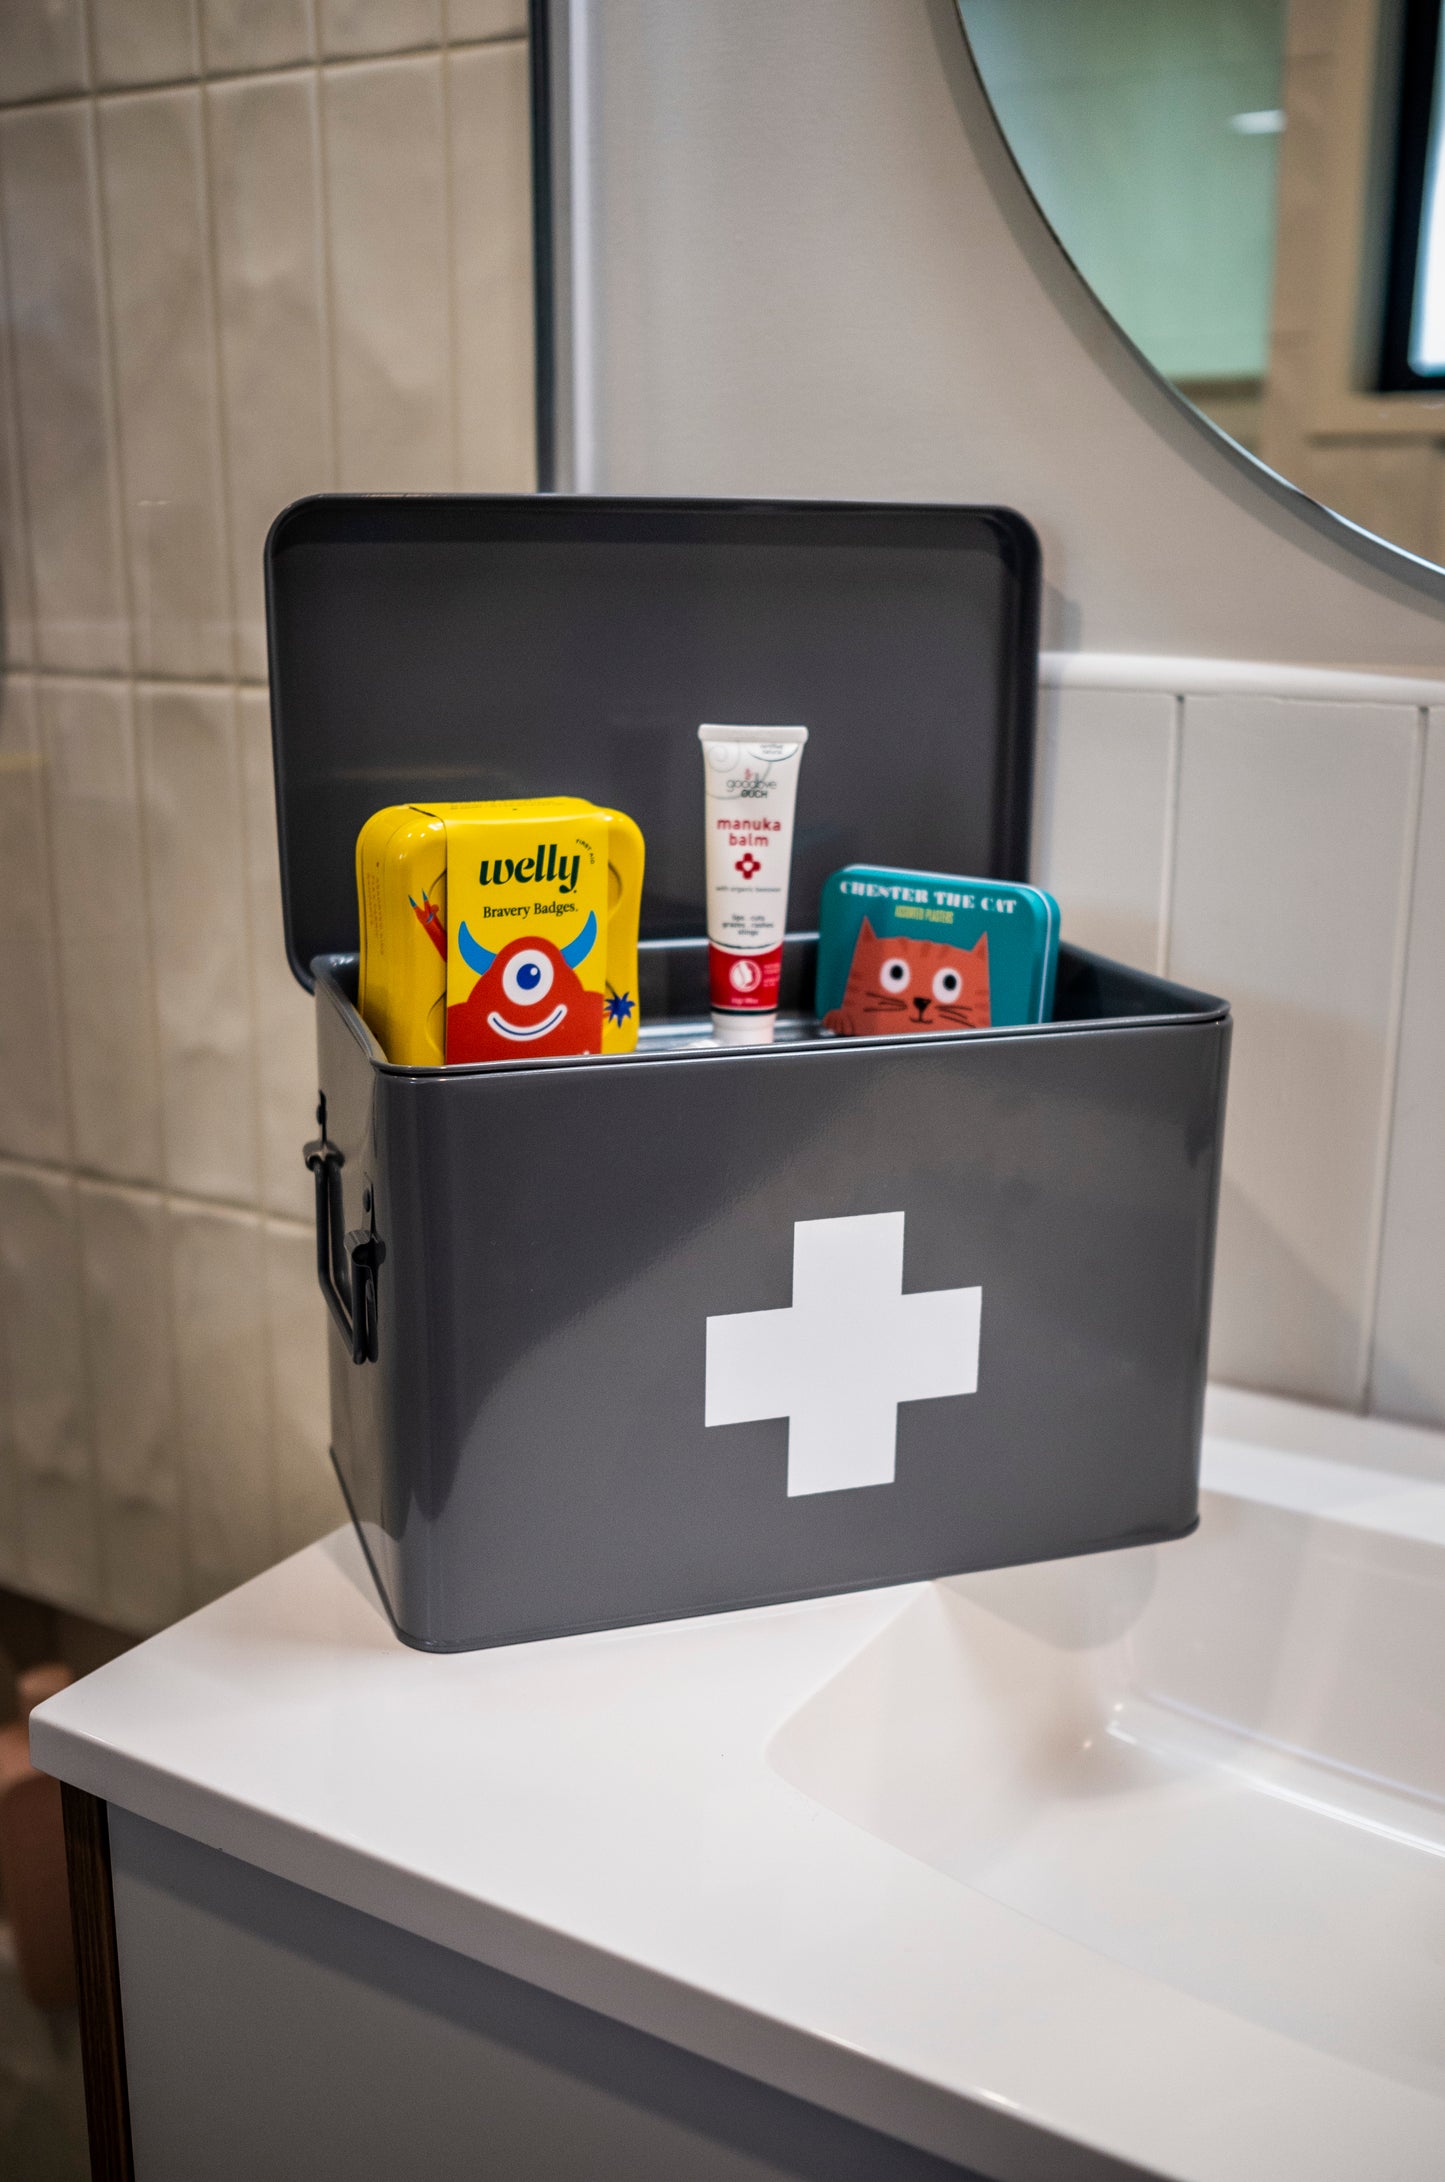 New Zealand family essential kit for your home first aid needs. Perfect gift for housewarming or people with children.